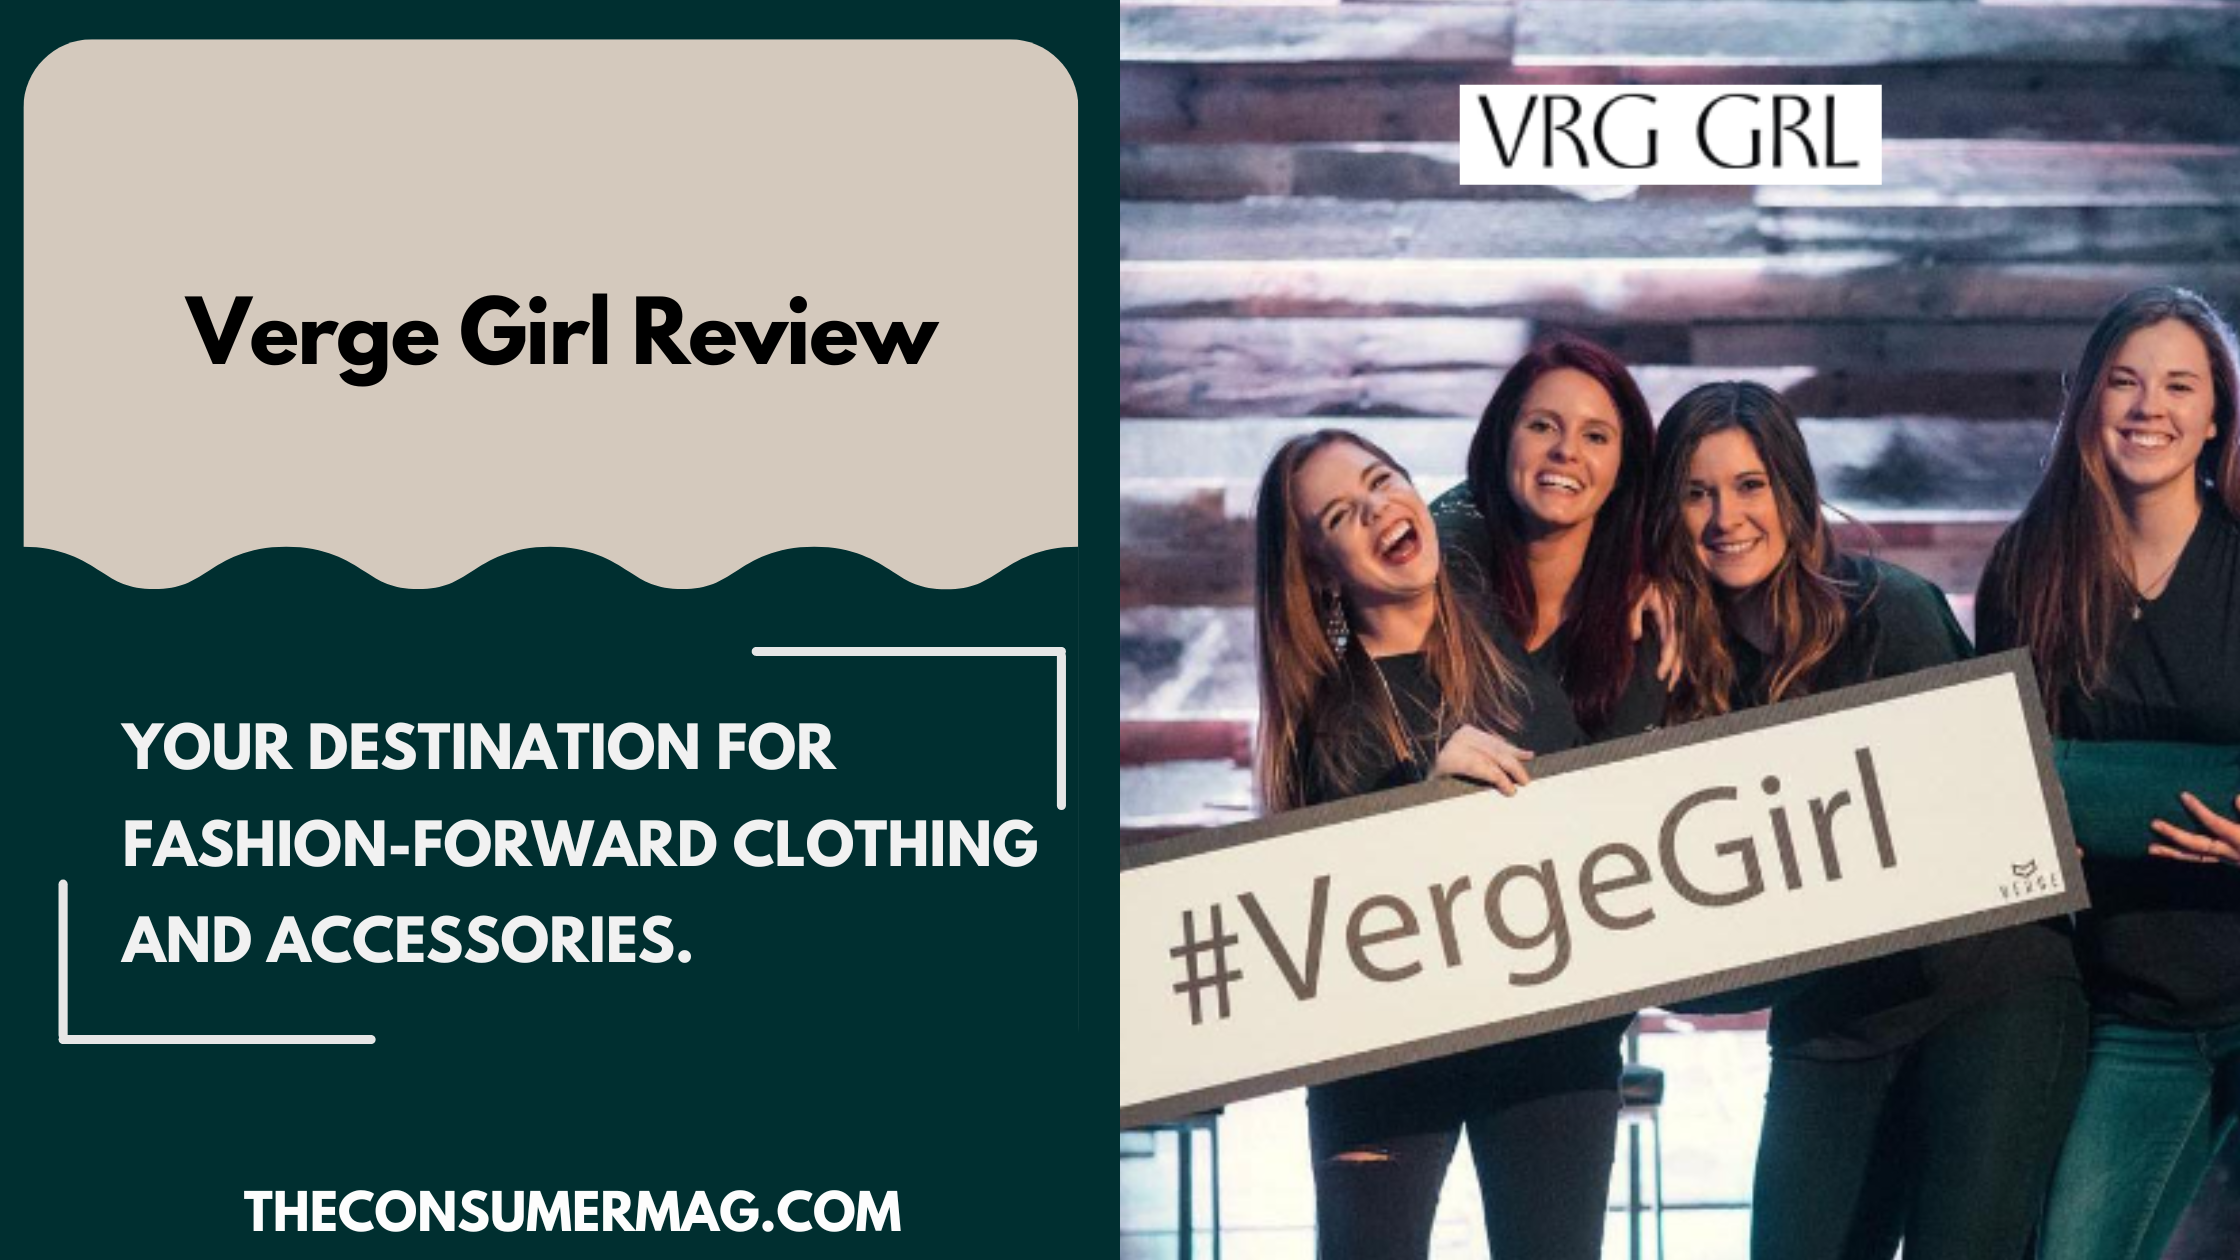 Verge Girl Featured Image